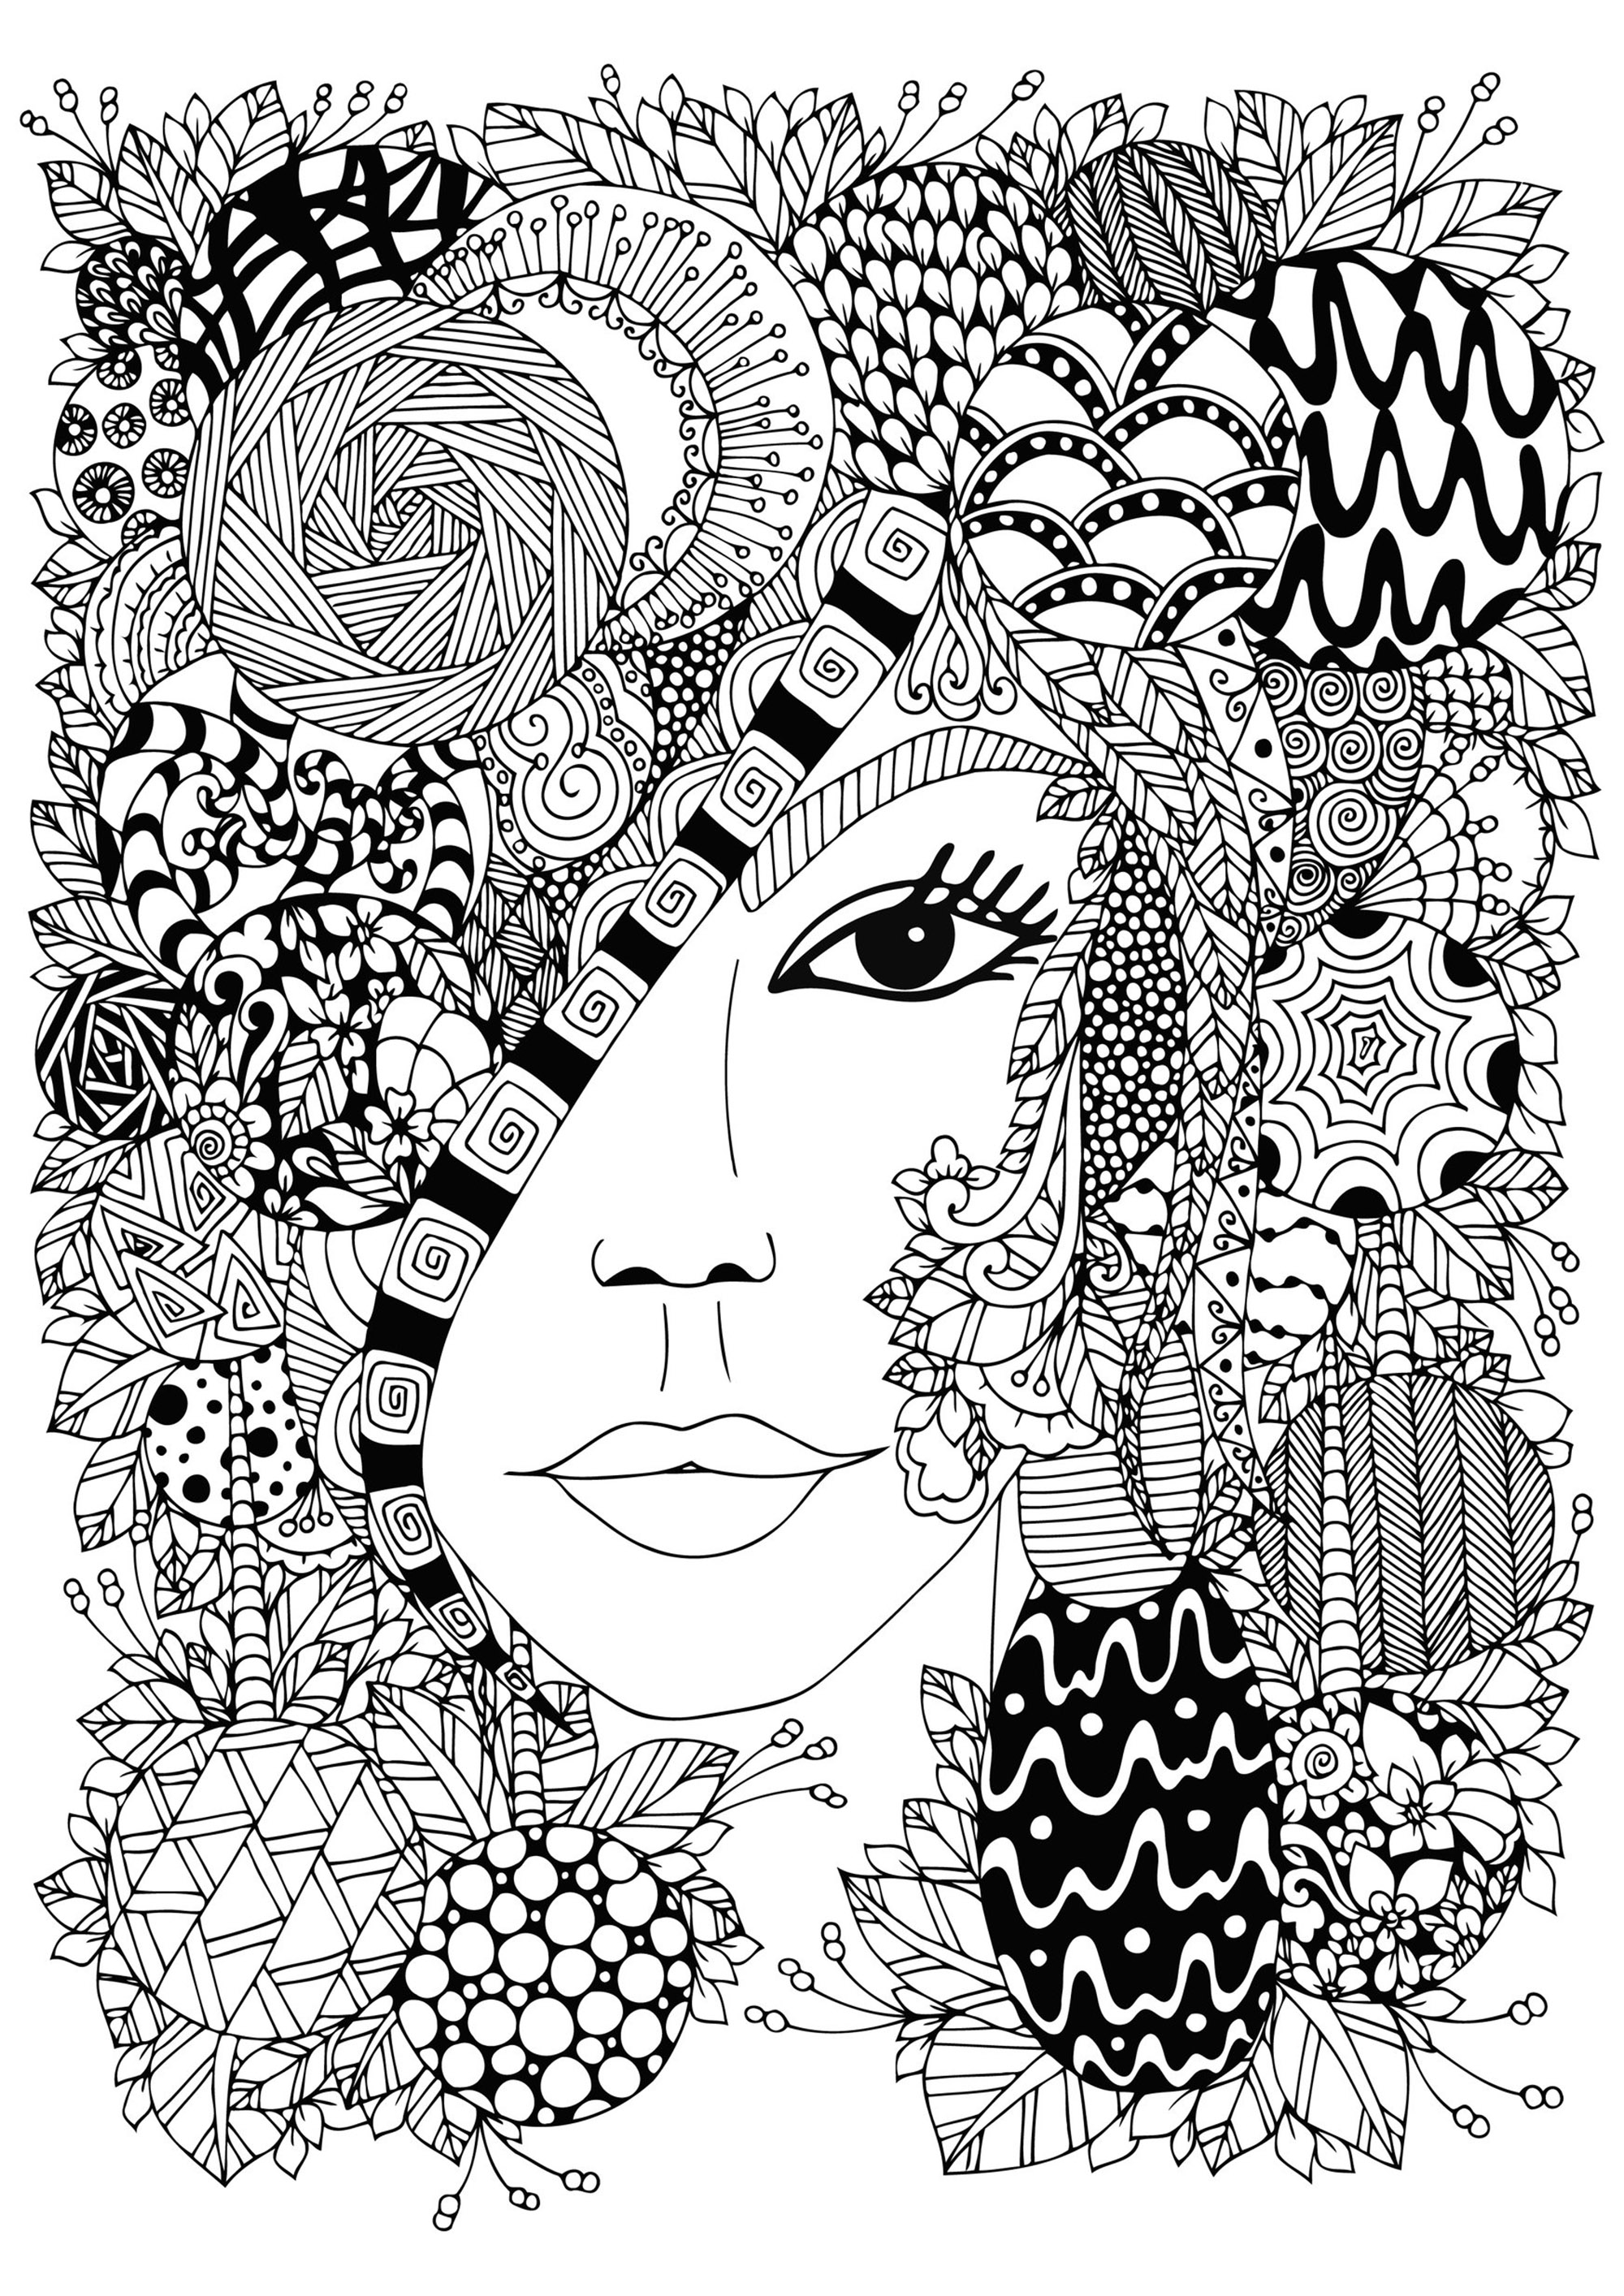 Elegant female face partially hidden by many Zentangle patterns, Source : 123rf   Artist : Tanvetka